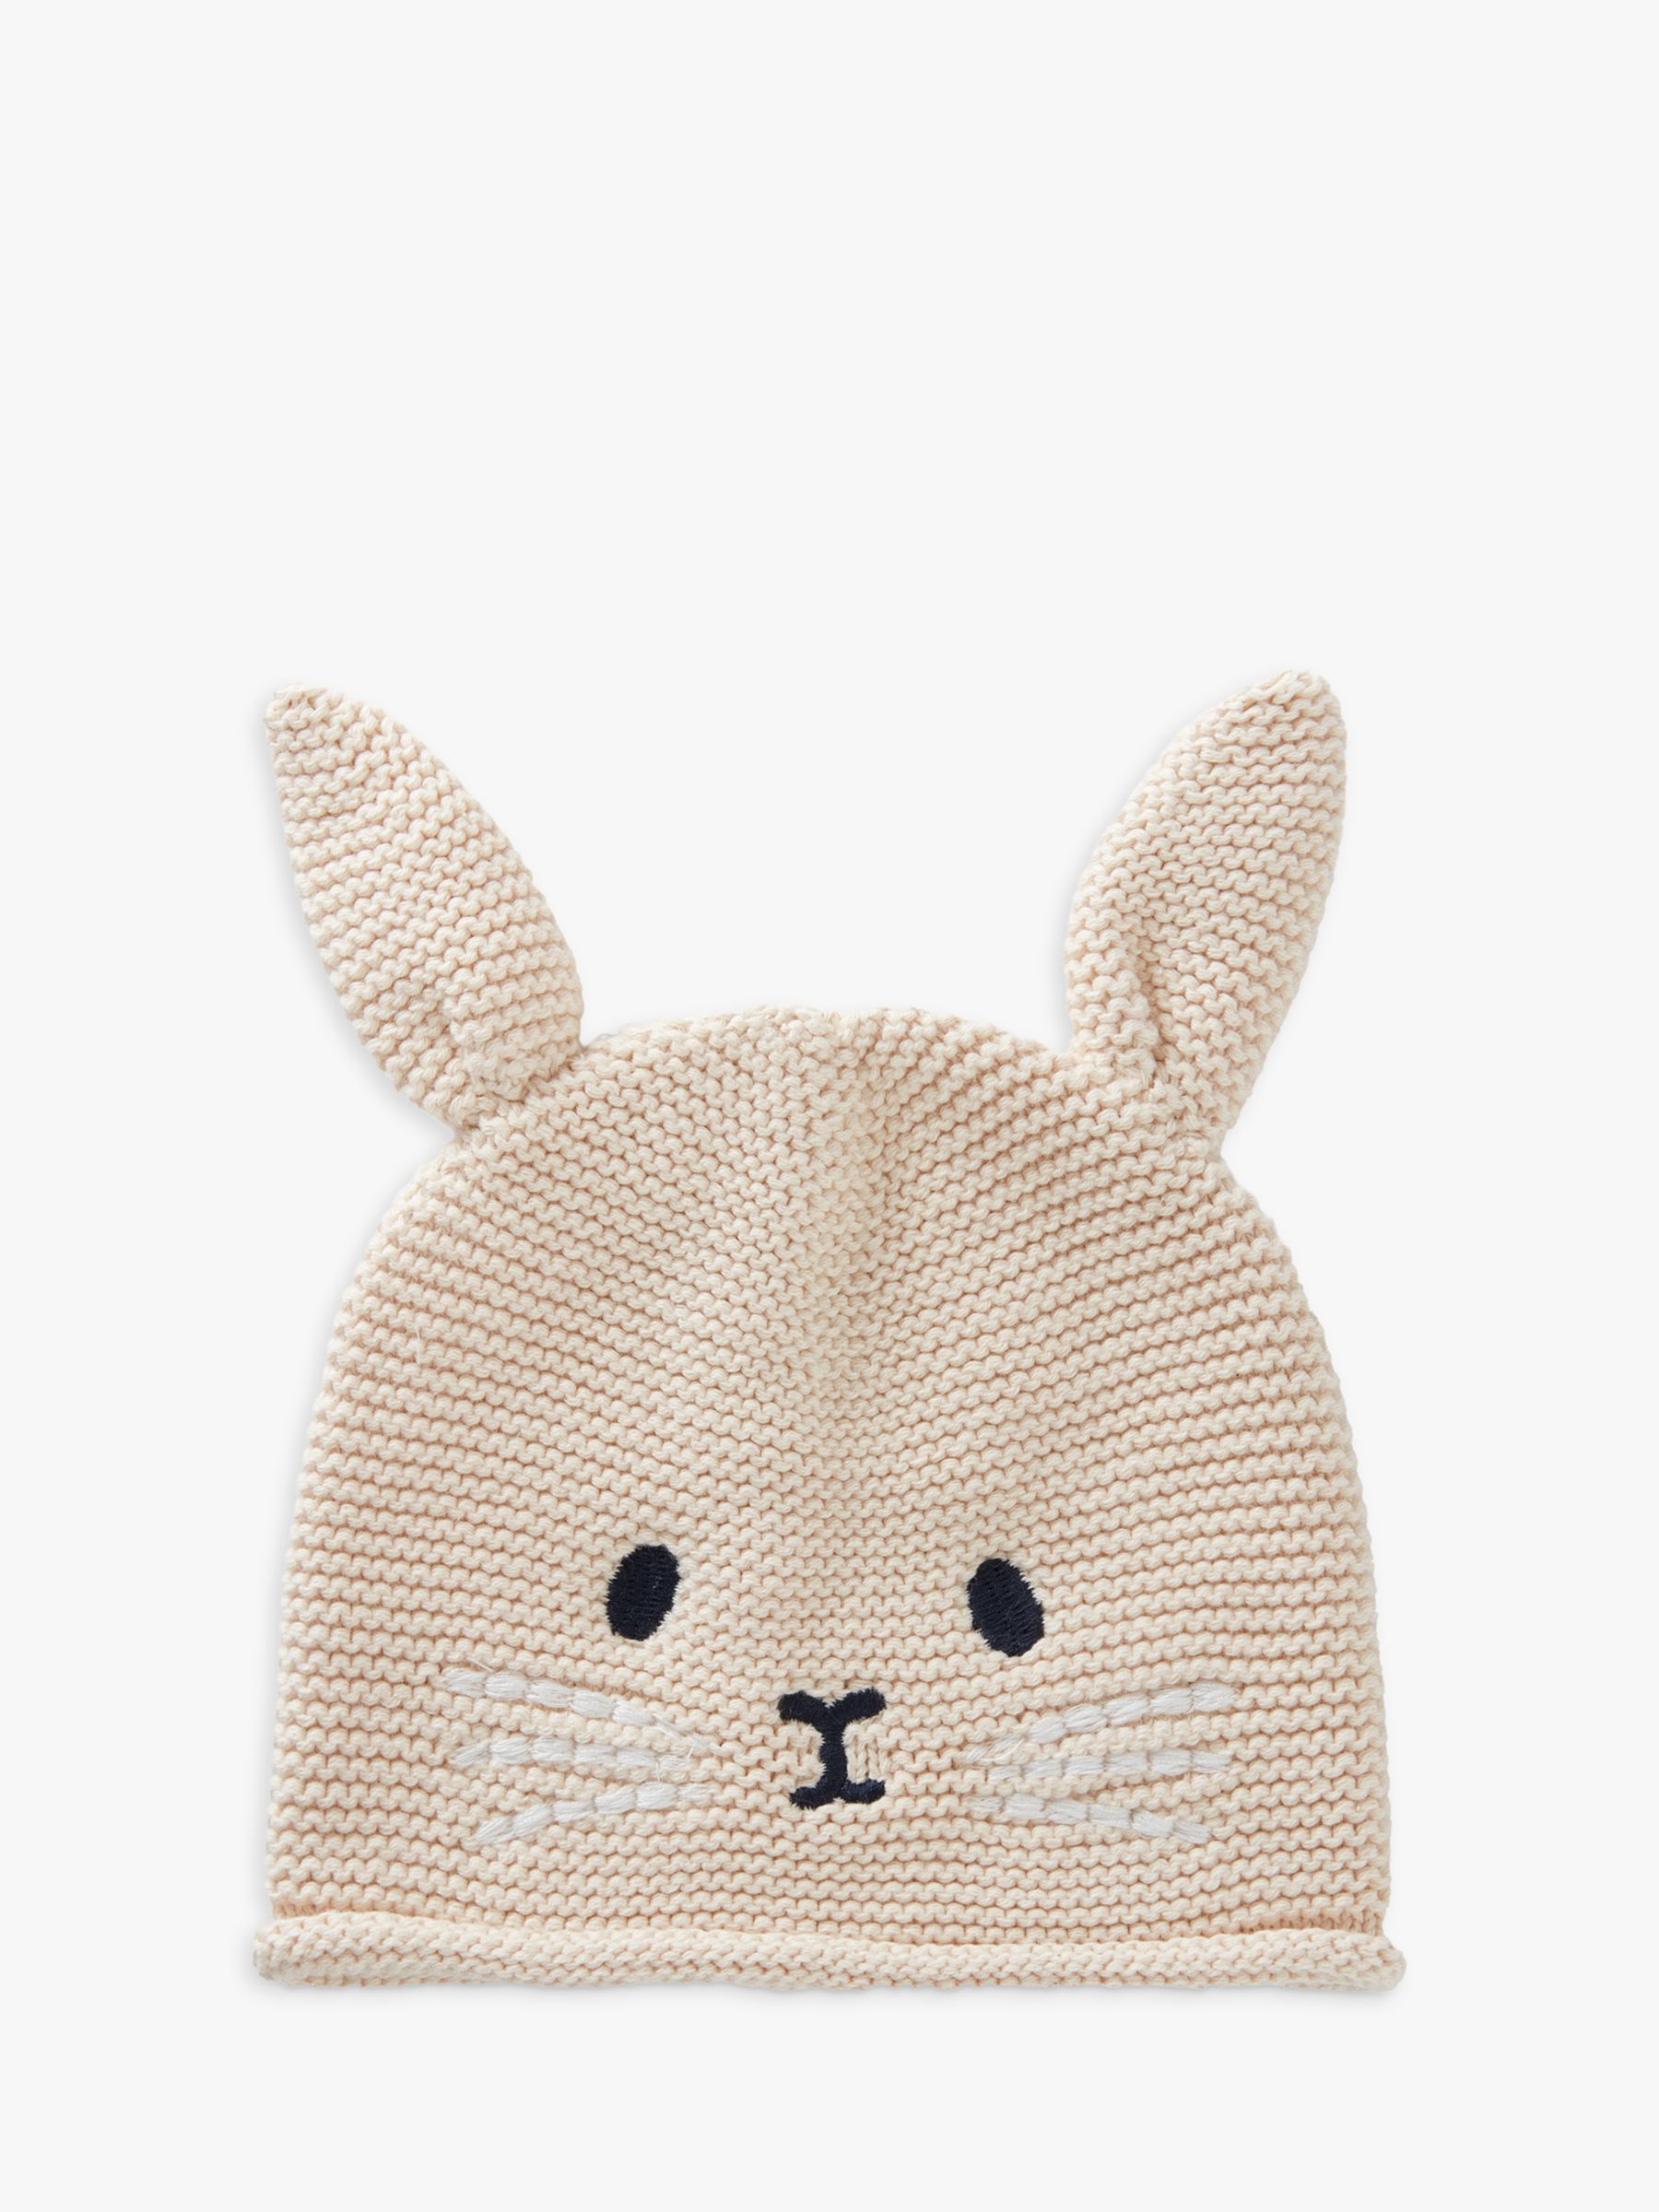 Benetton Baby Tricot Bunny Face Knit Hat, Light Powder, 1-3 months